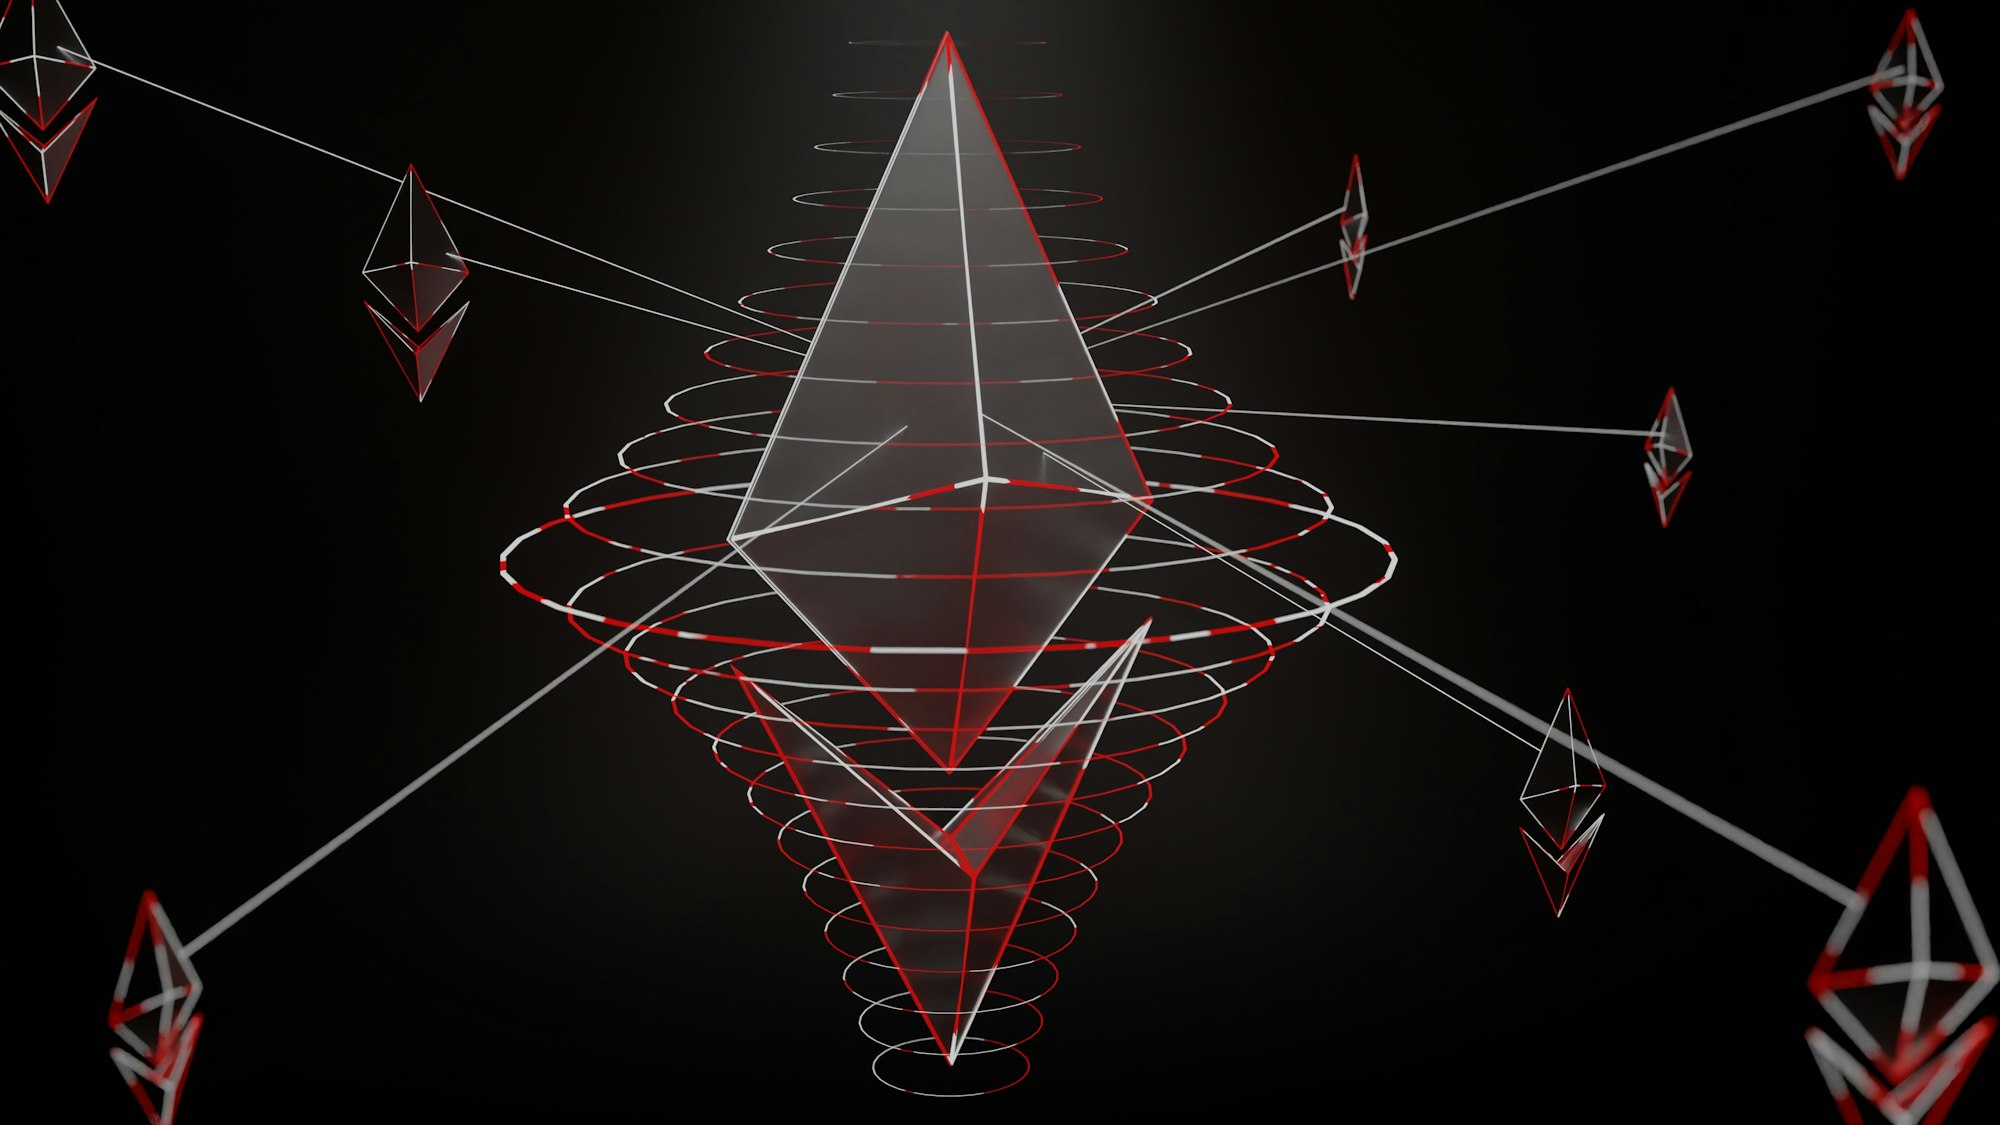 3D illustration of a network of ethereum in dark.
red, white, and black colored ethereum illustration.
「 LOGO / BRAND / 3D design 」 
WhatsApp: +917559305753
 Email: shubhamdhage000@gmail.com